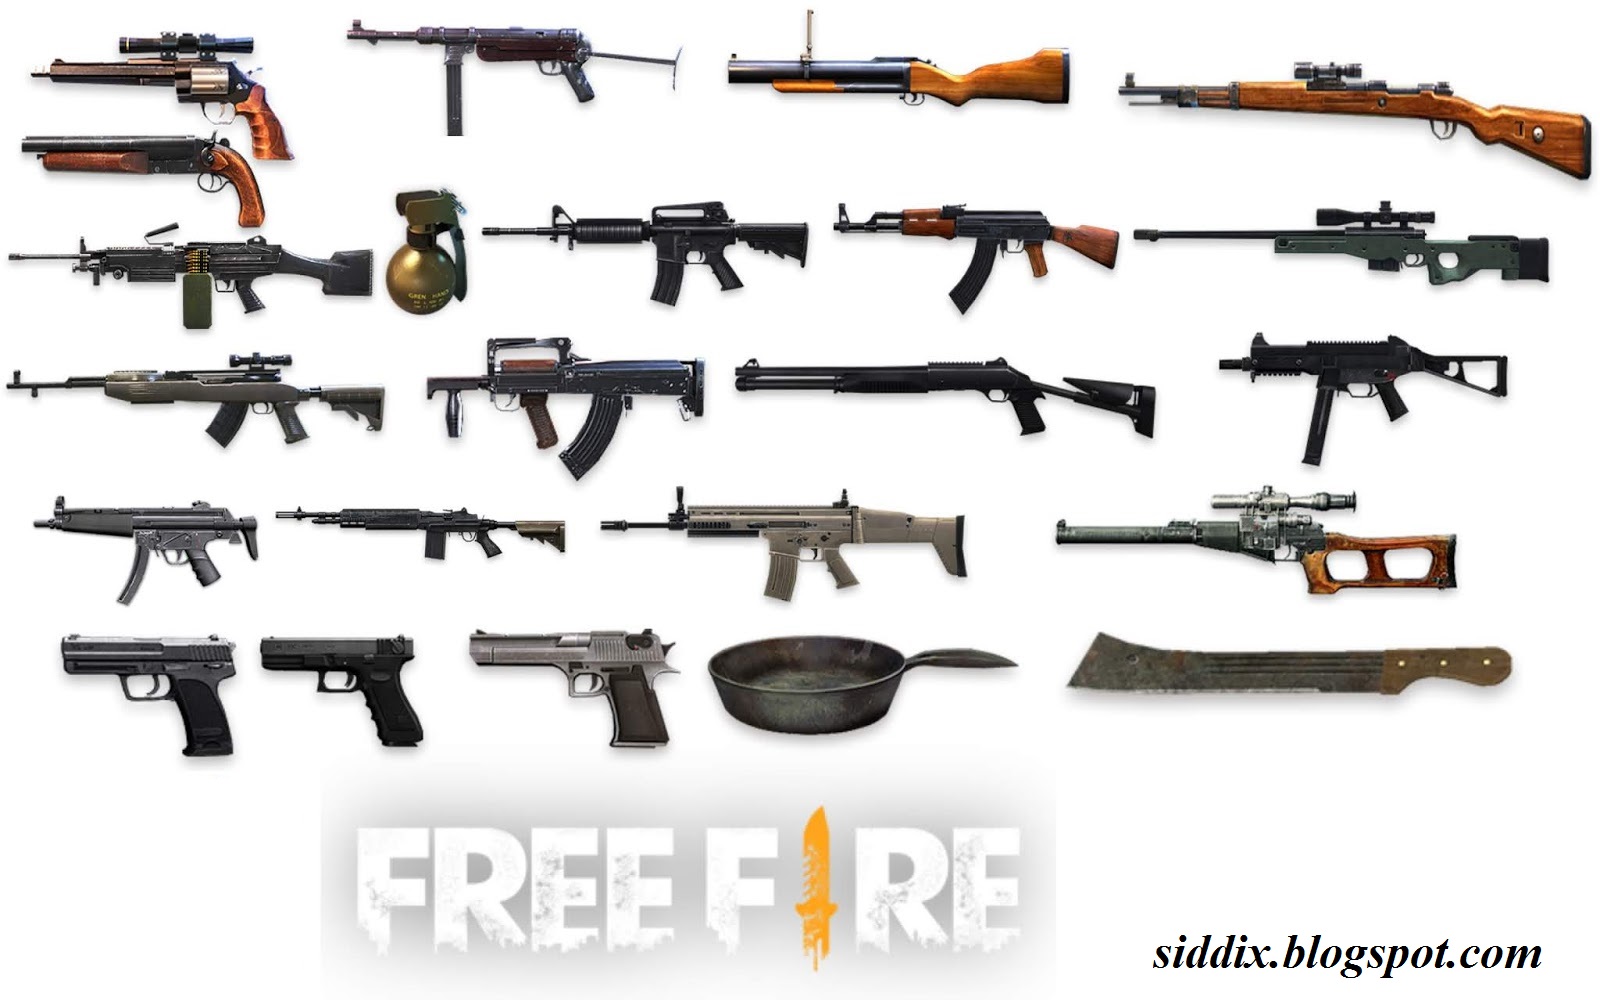 Tips and Trik Game Free Fire Battle Ground Siddix